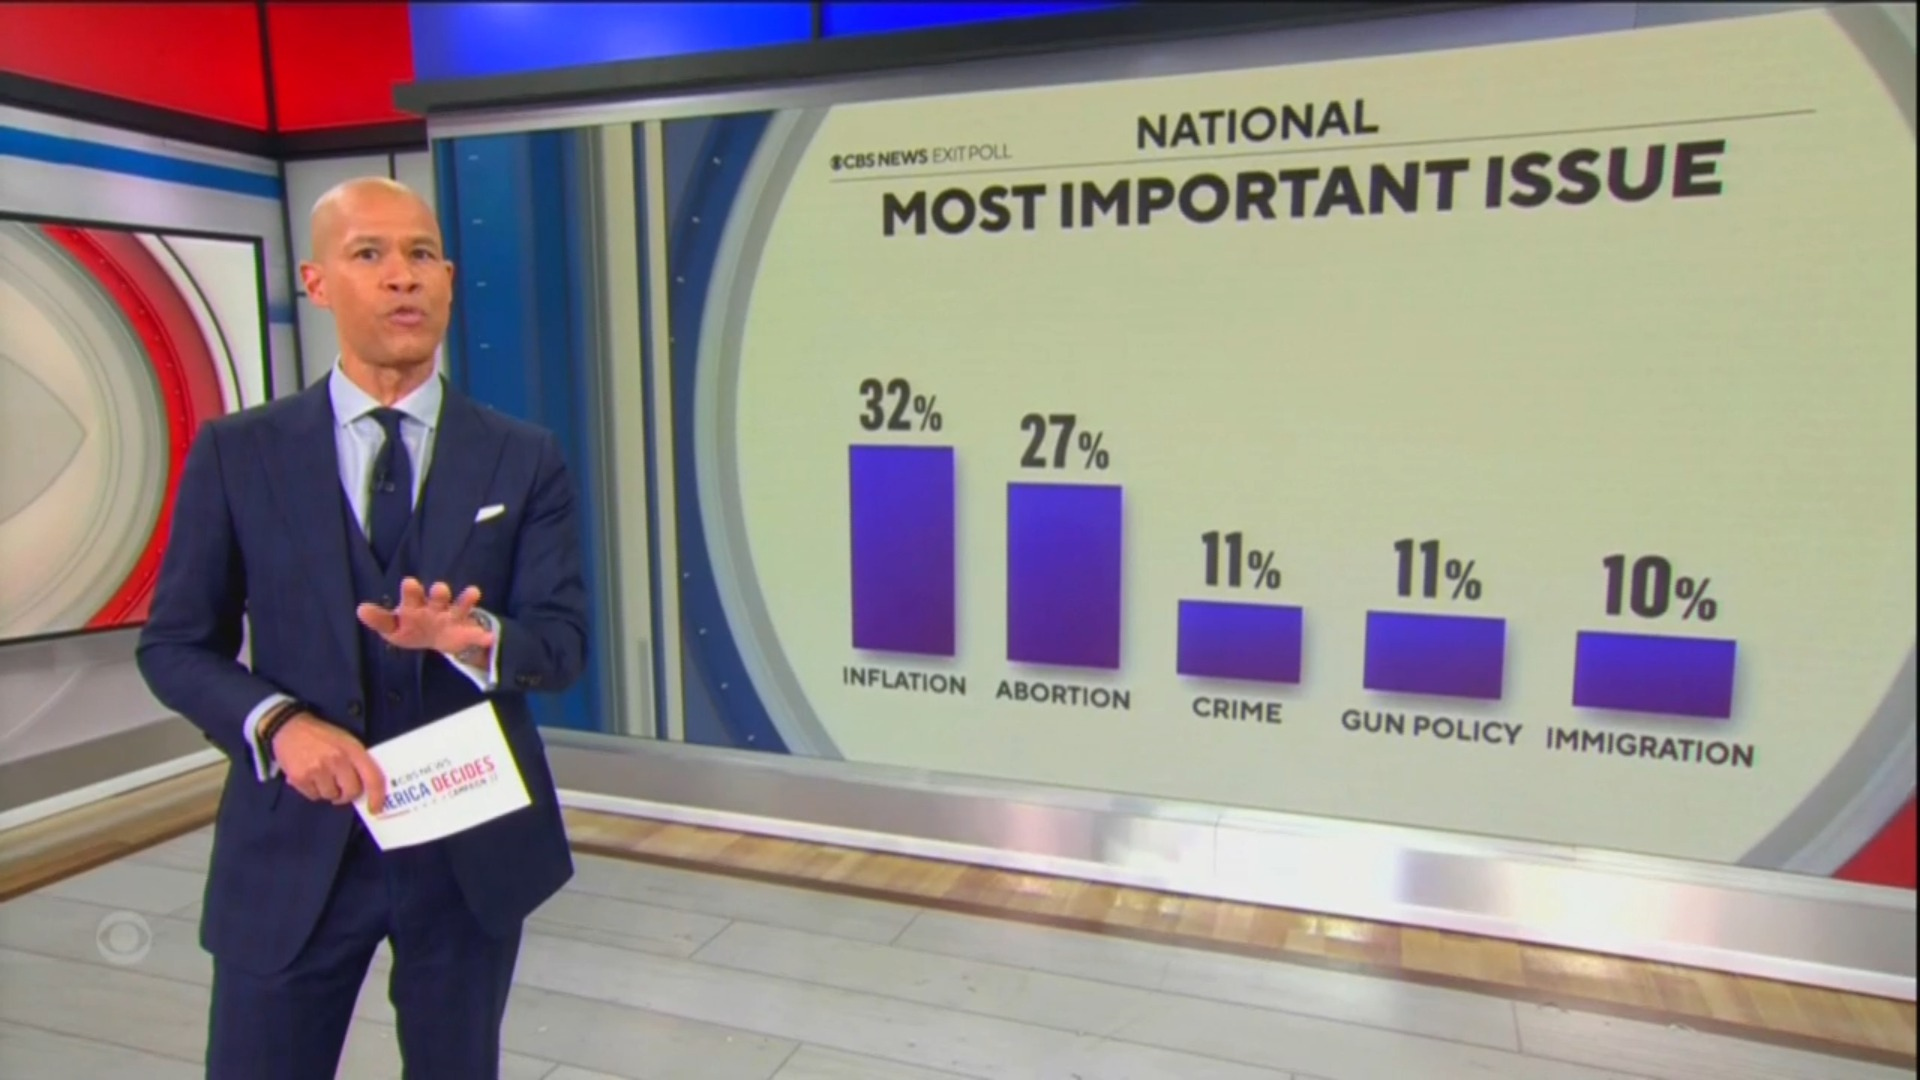 Watch Cbs Evening News First Cbs News Exit Polls Released In Midterms Full Show On Cbs 3034